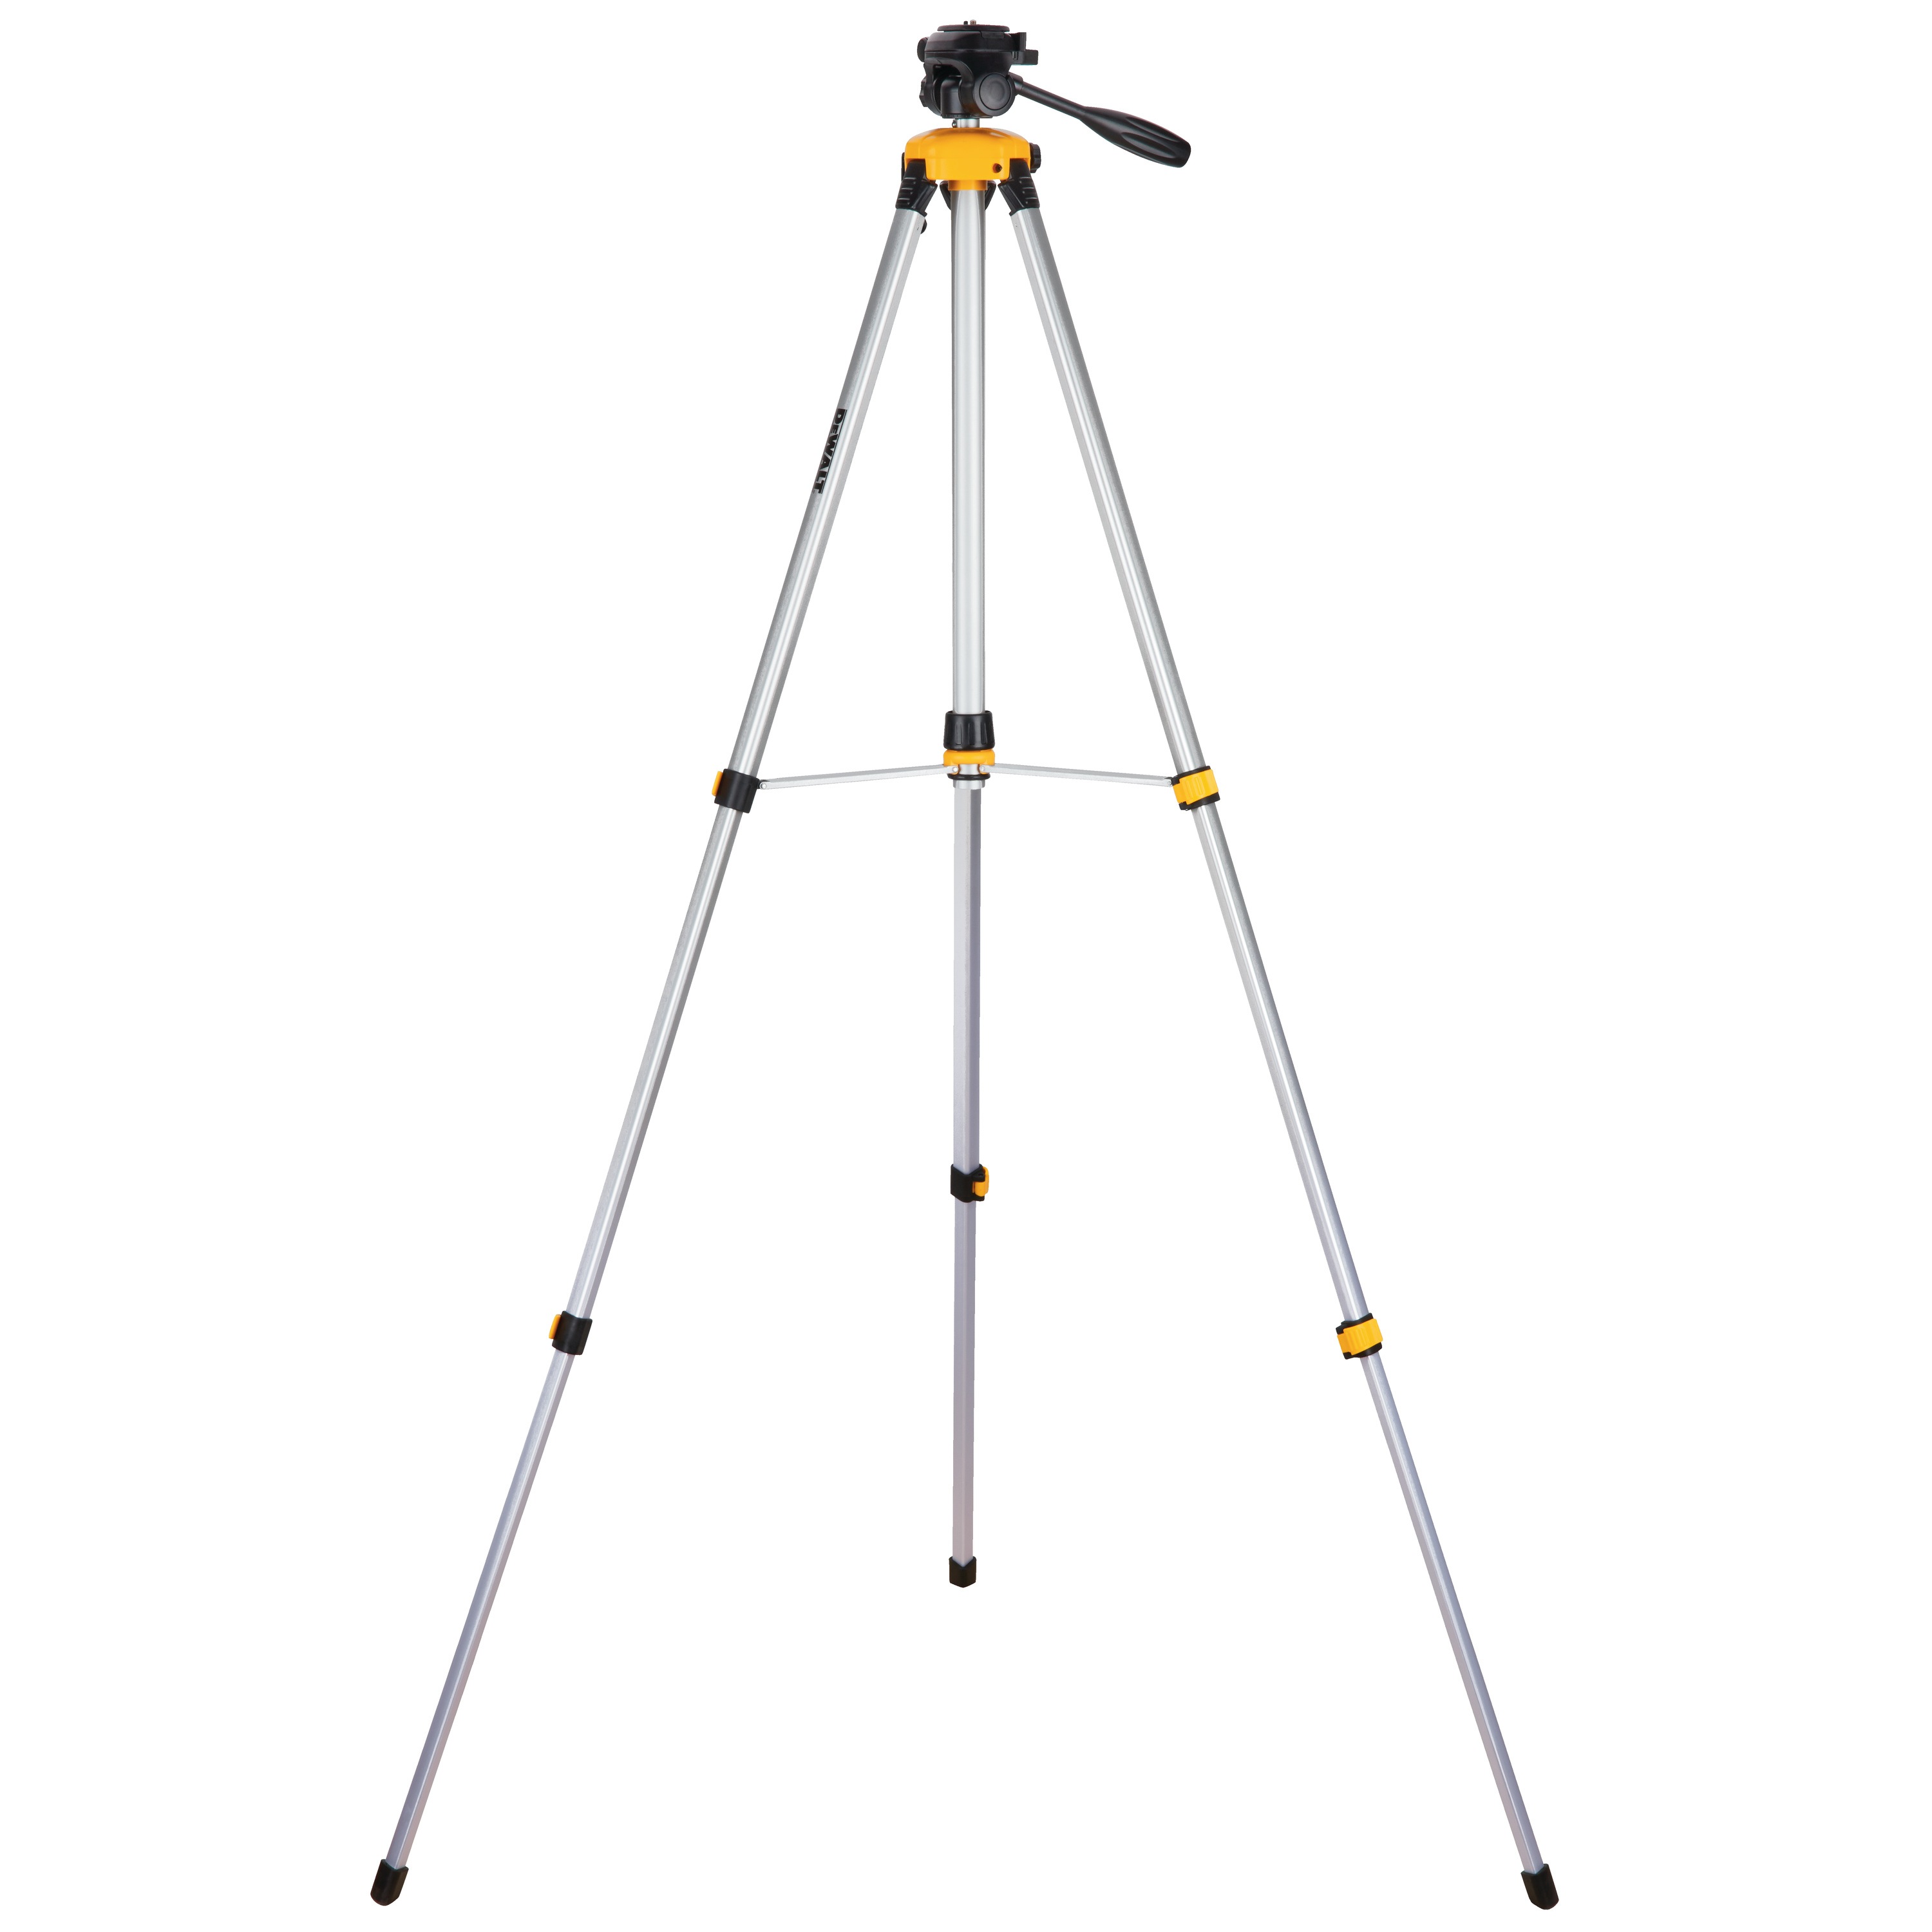 Profile of extended laser tripod with tilting head.